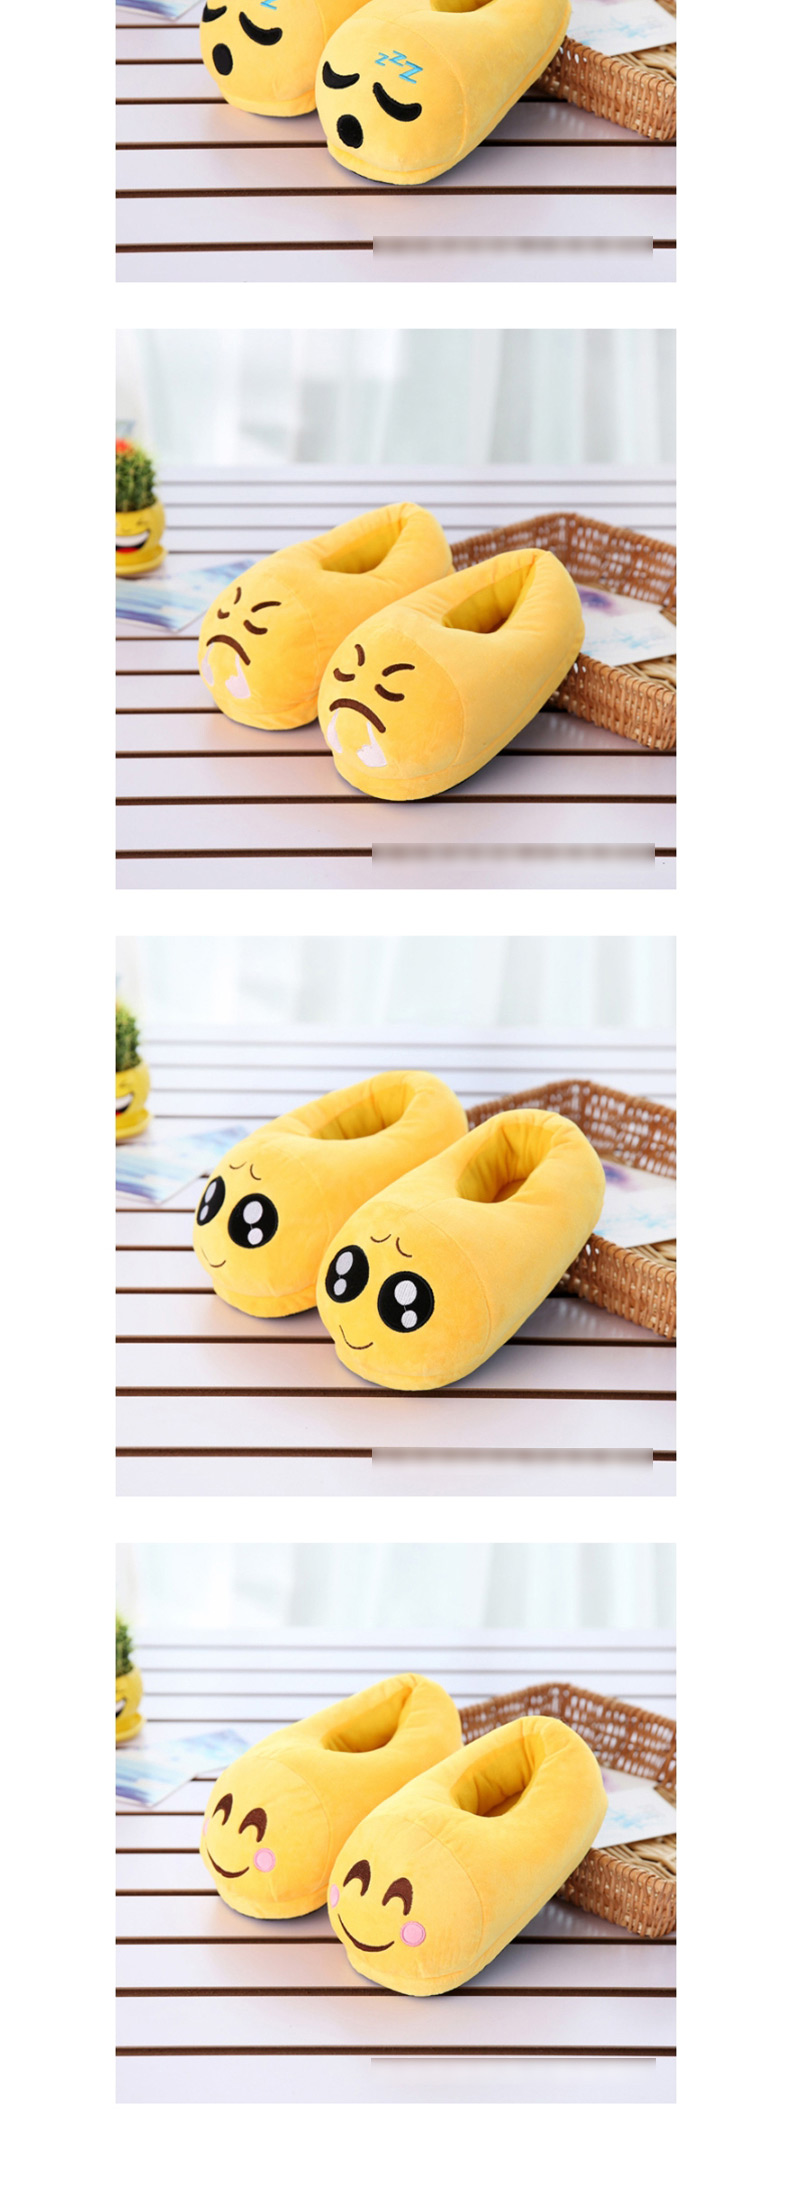 Fashion 18 Yellow Blush Cartoon Expression Plush Bag With Cotton Slippers,Slippers